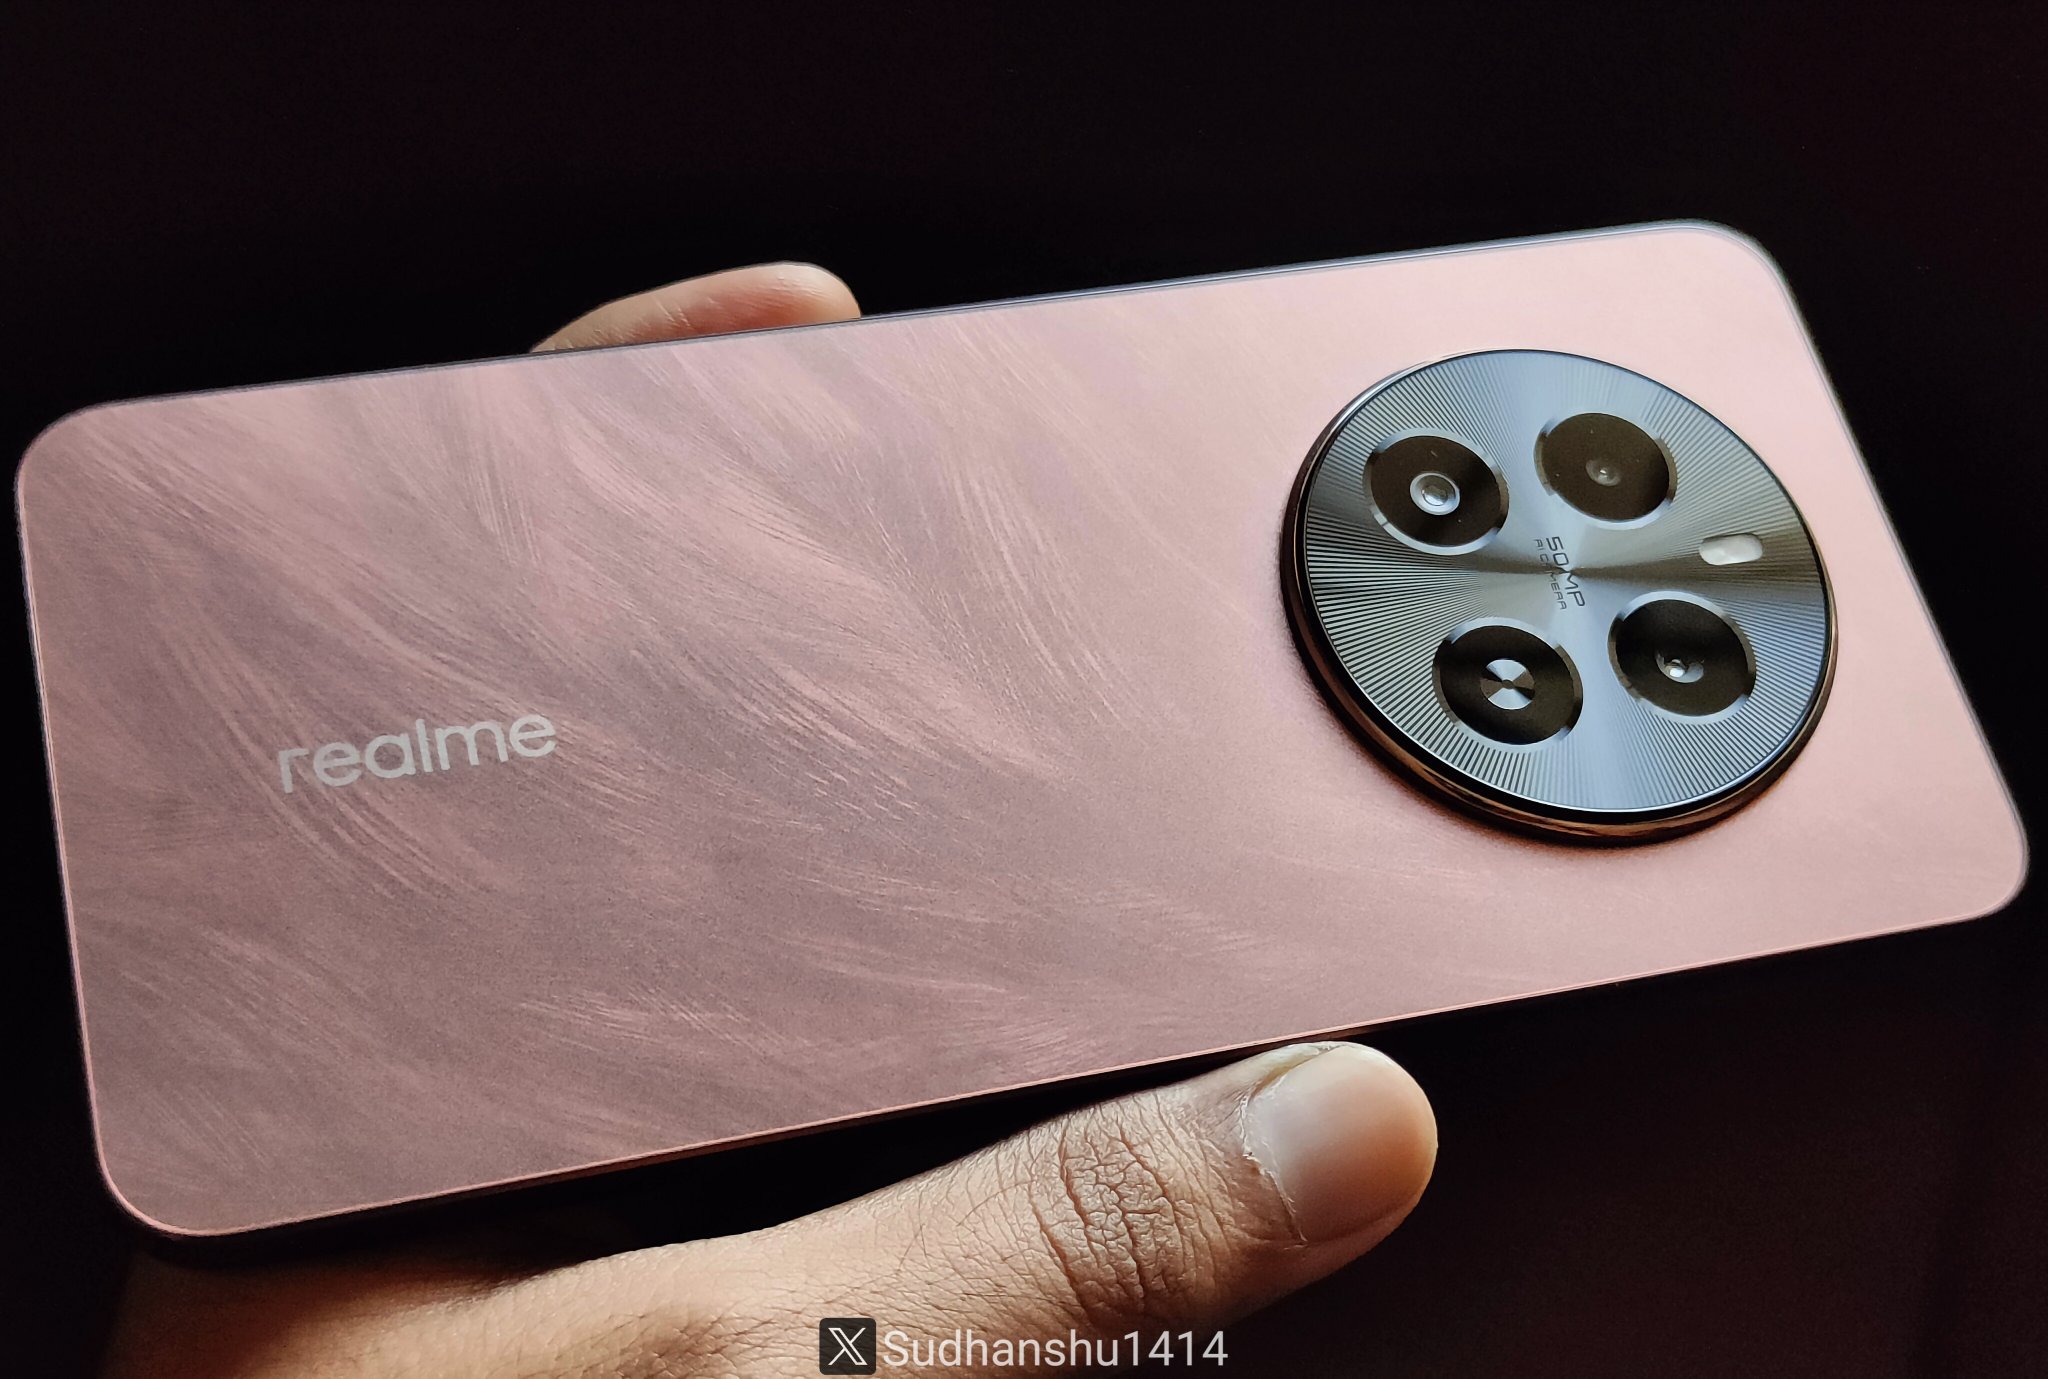 An insider has revealed what the realme P1 5G will look like